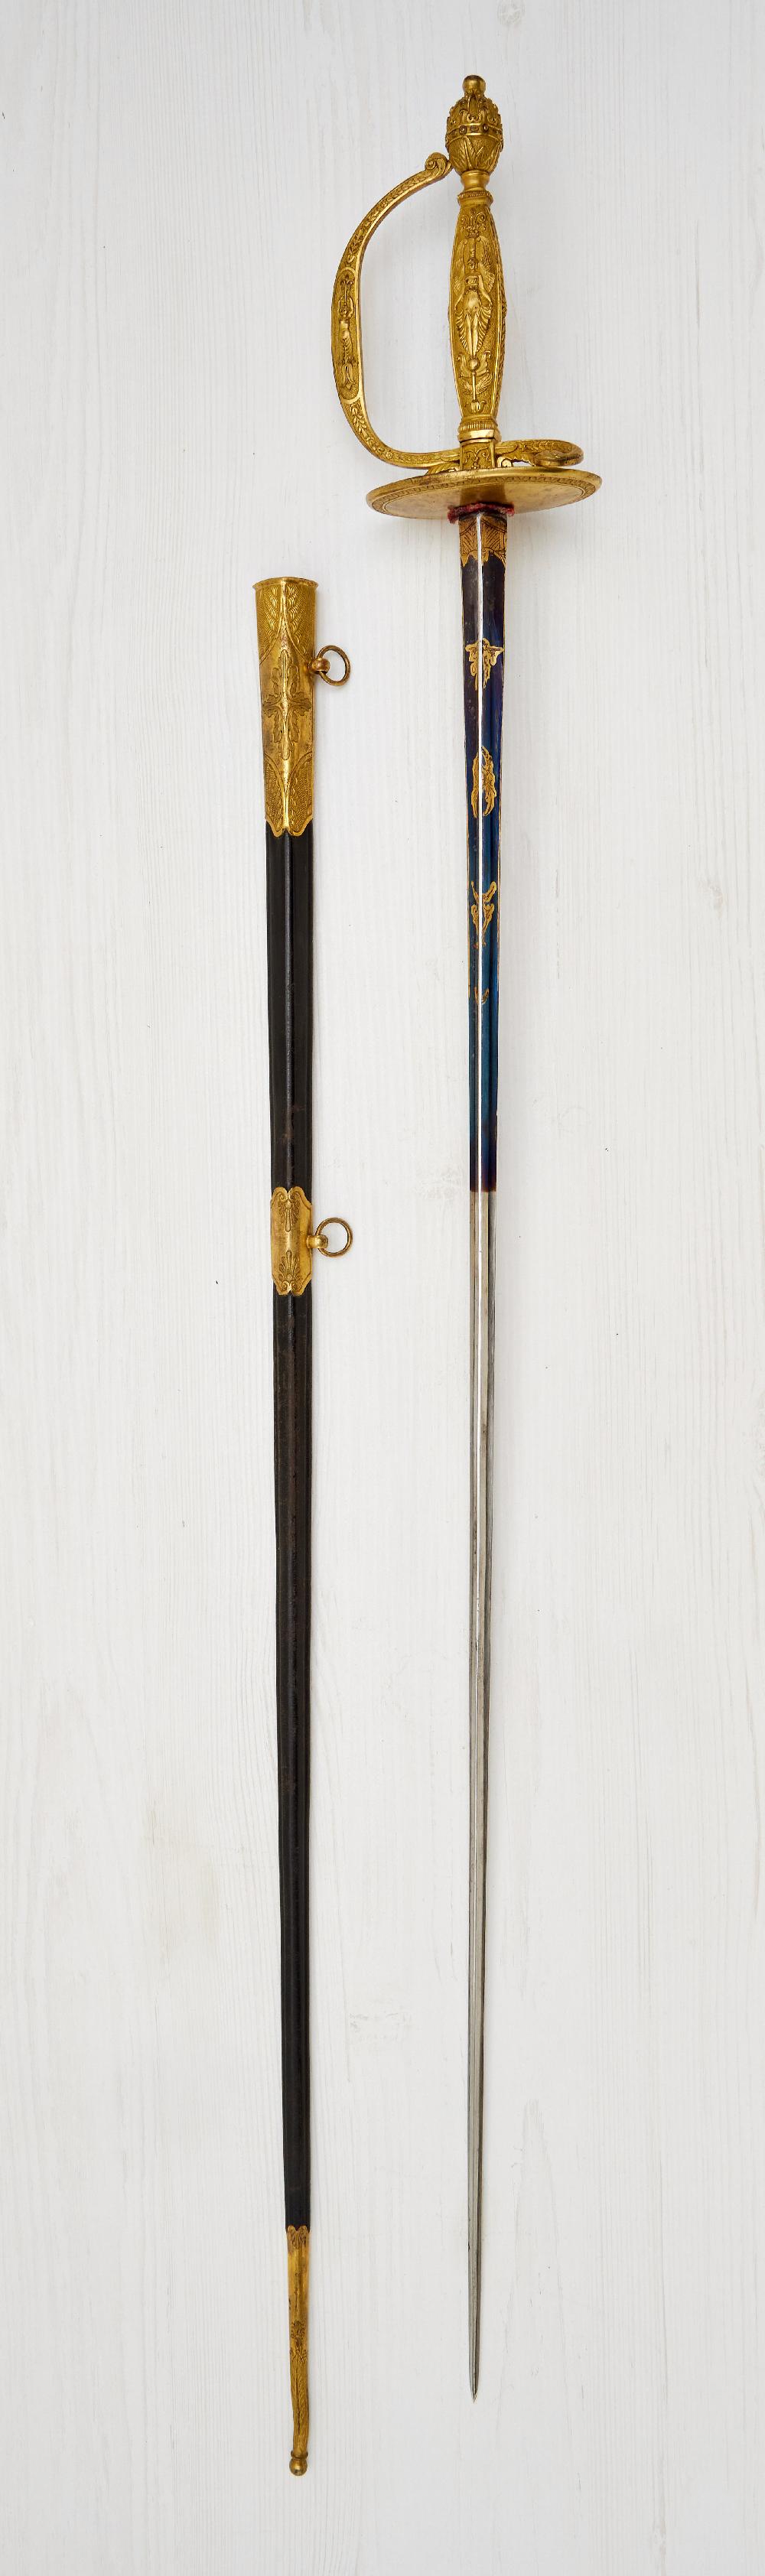 Kingdom of the Two Sicilies : Sword from the possession of the Regent of the Kingdom of the Two ... - Image 3 of 5